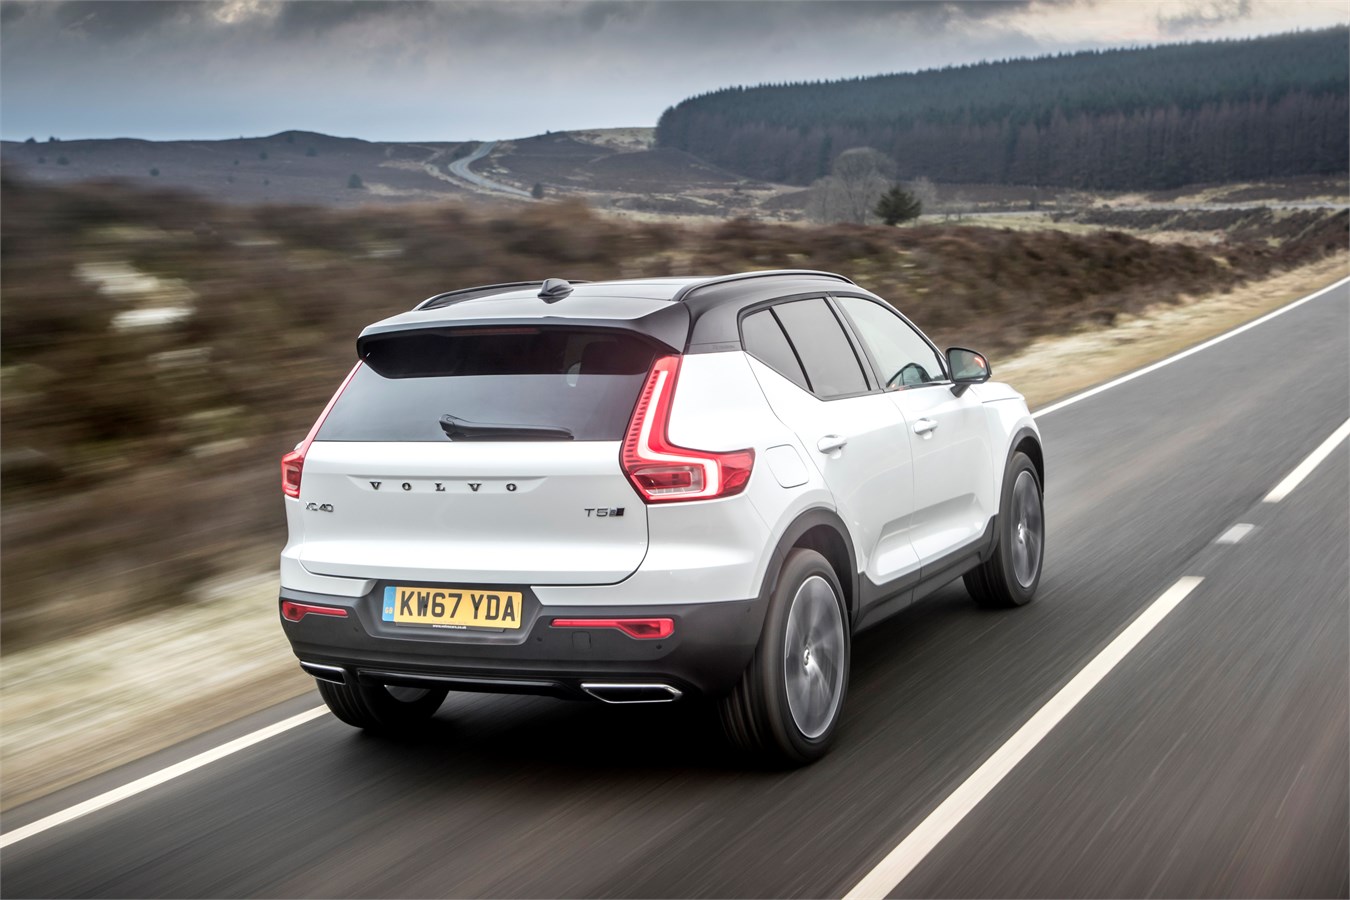 Volvo XC40 crowned What Car? Car of the Year 2018